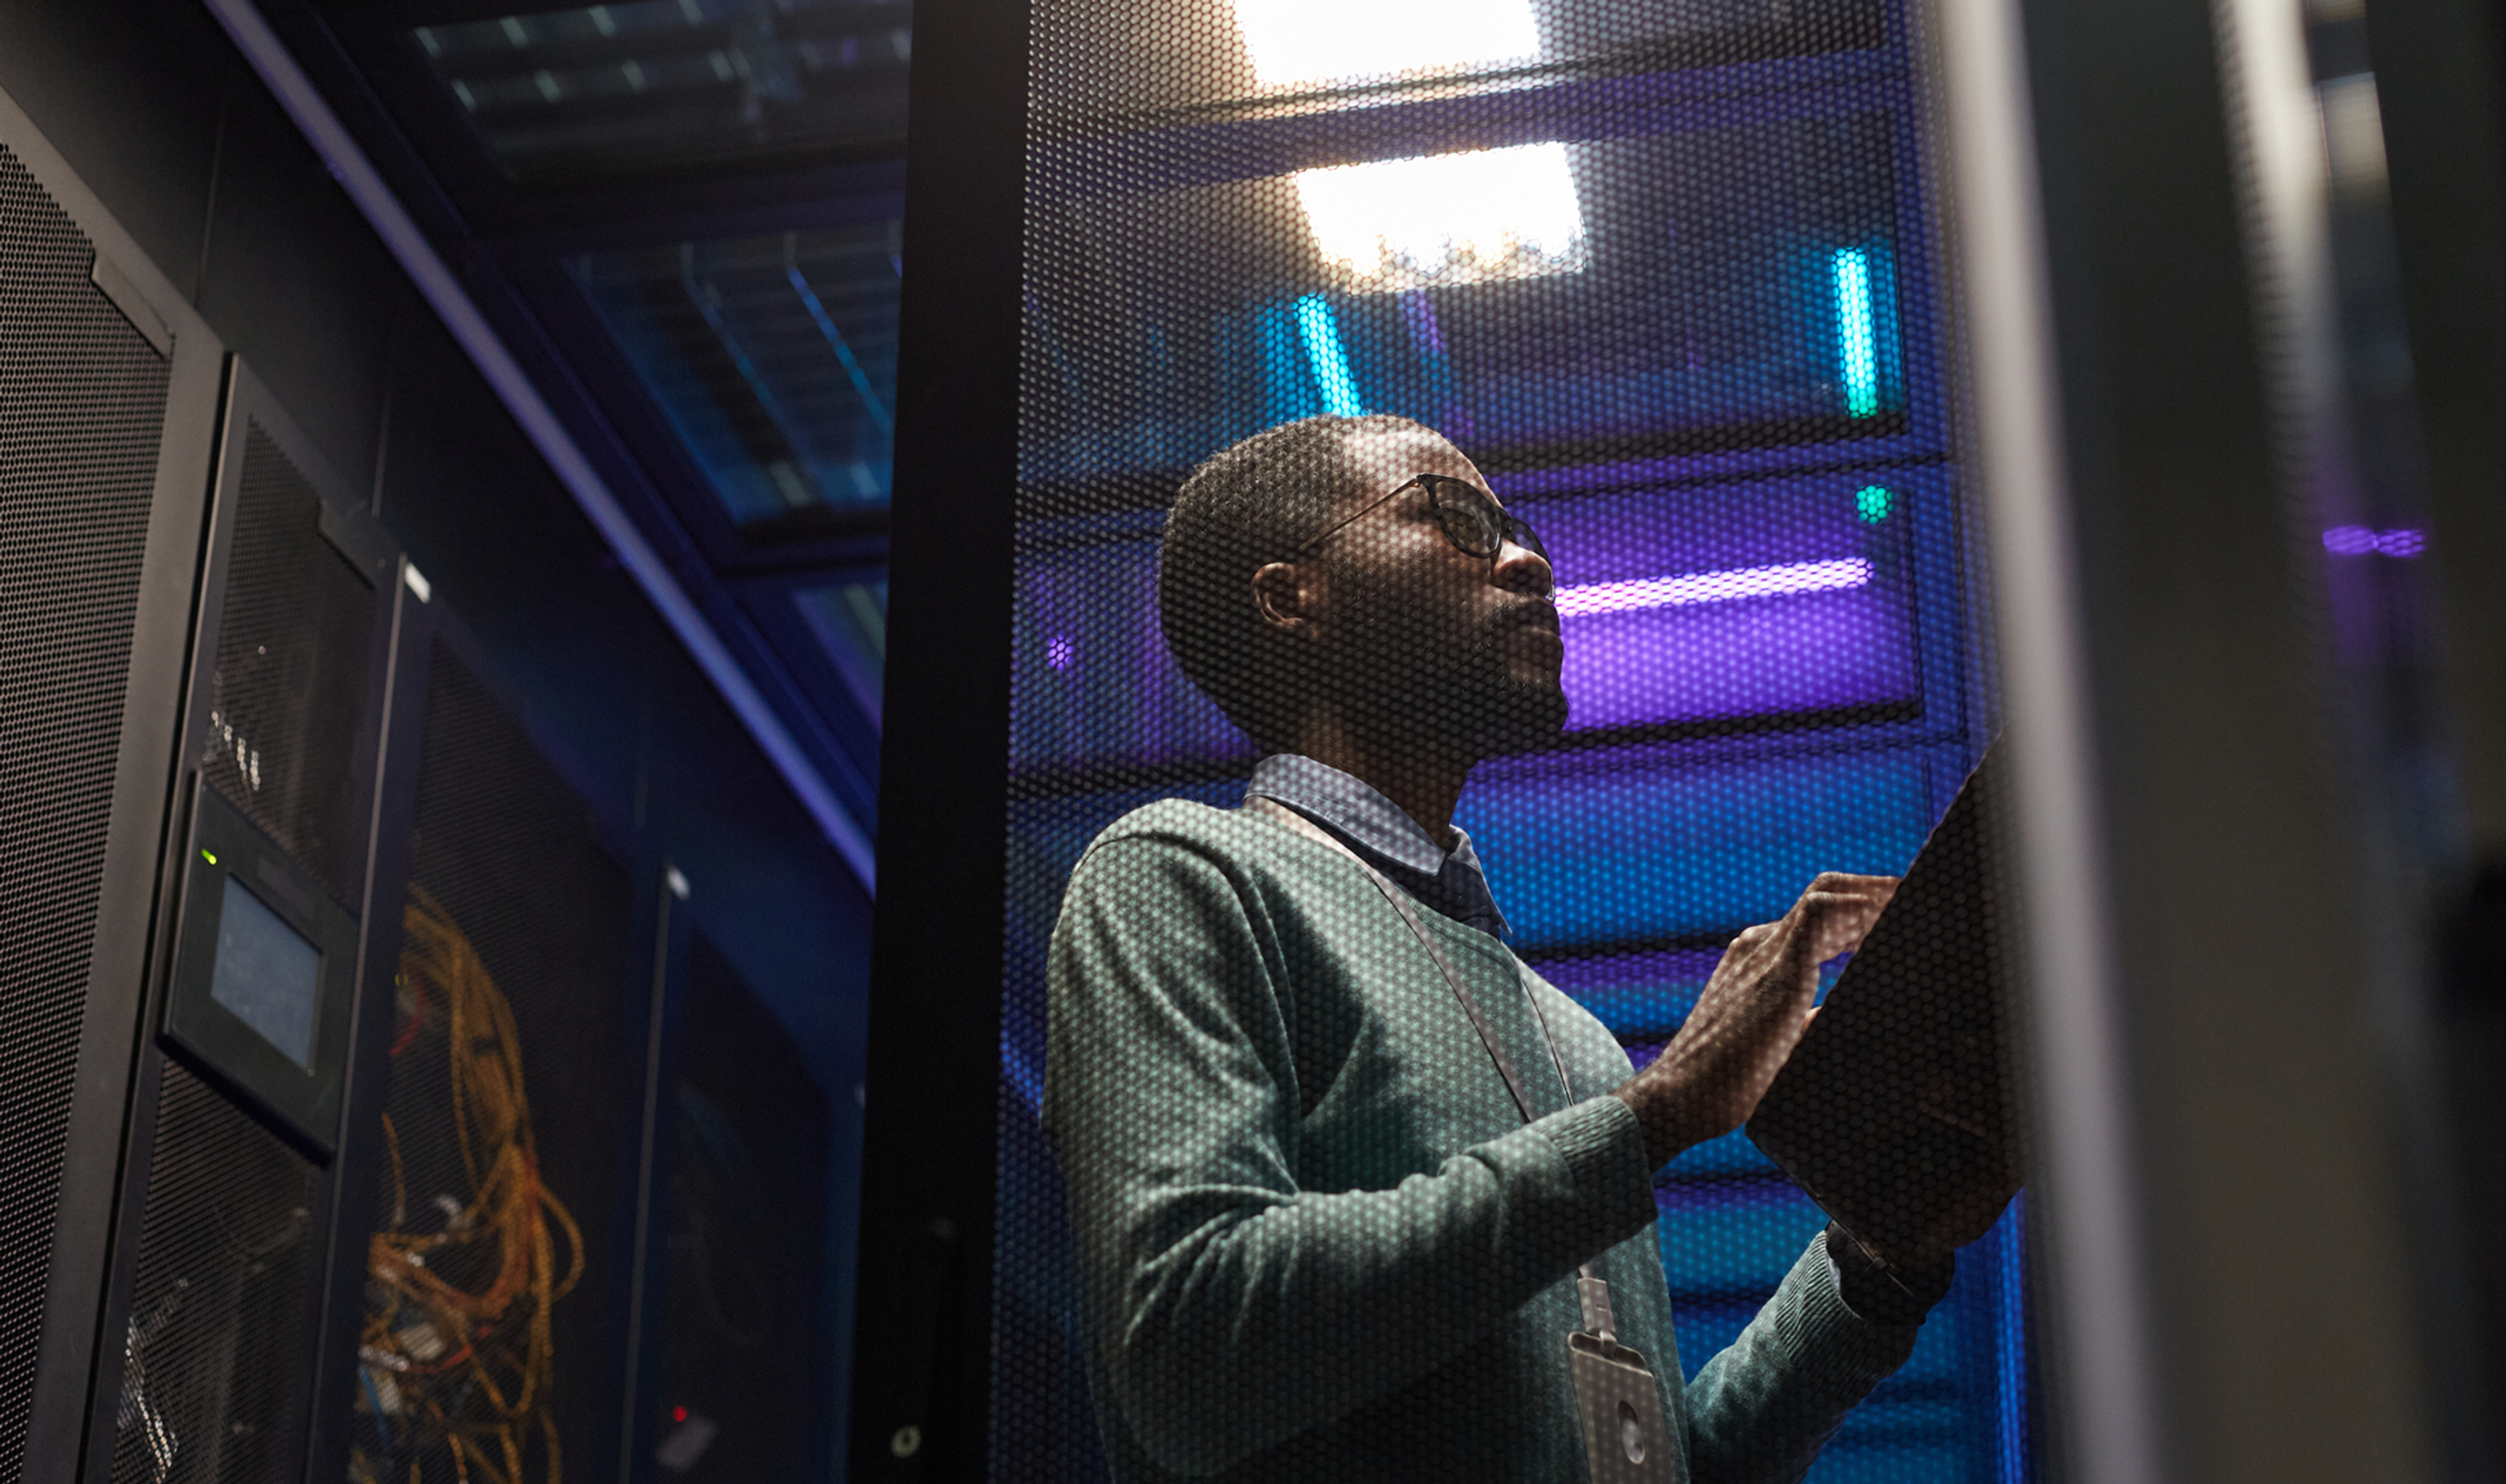 A person with a clipboard inspects a server room, illuminated by blue lights.